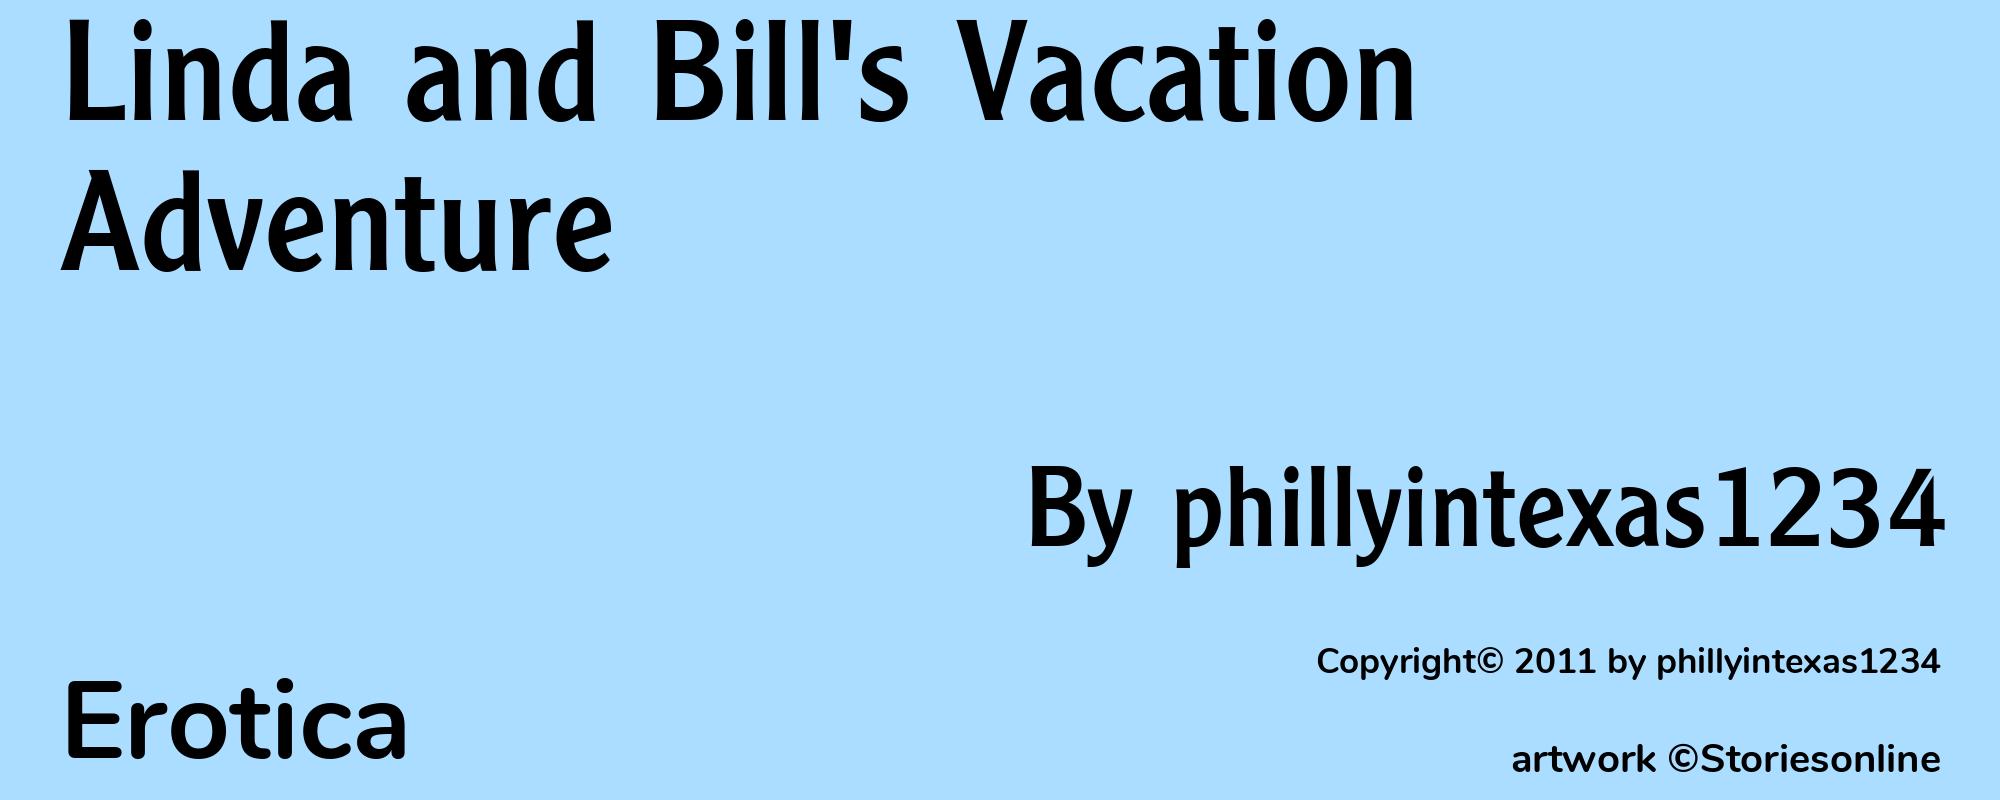 Linda and Bill's Vacation Adventure - Cover